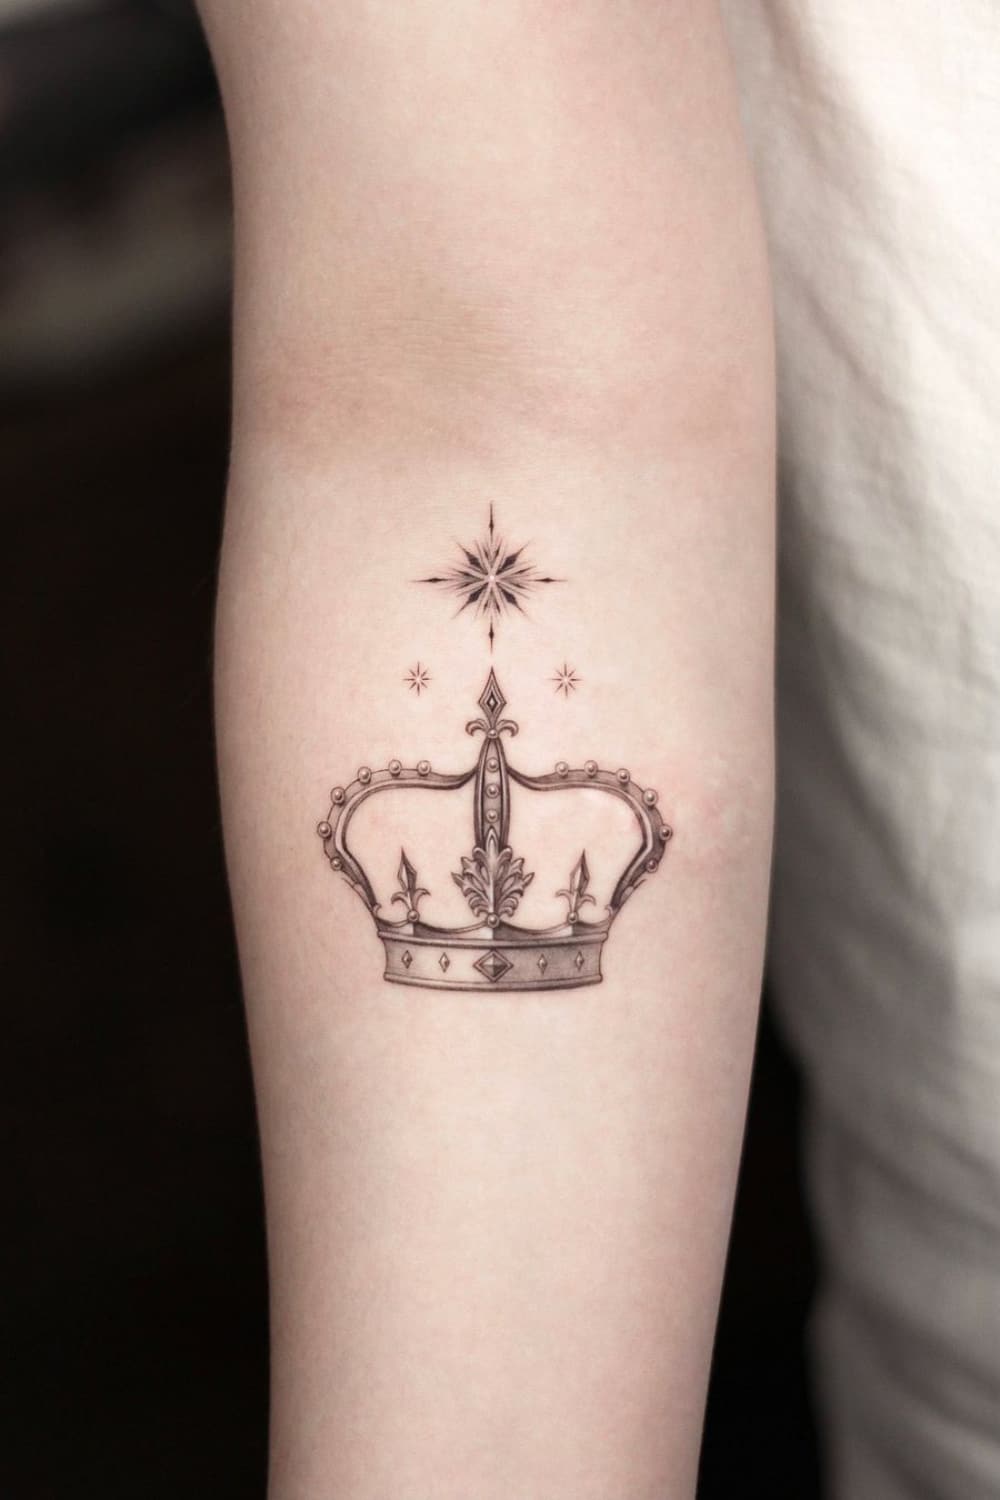 Crown Tattoo With Star